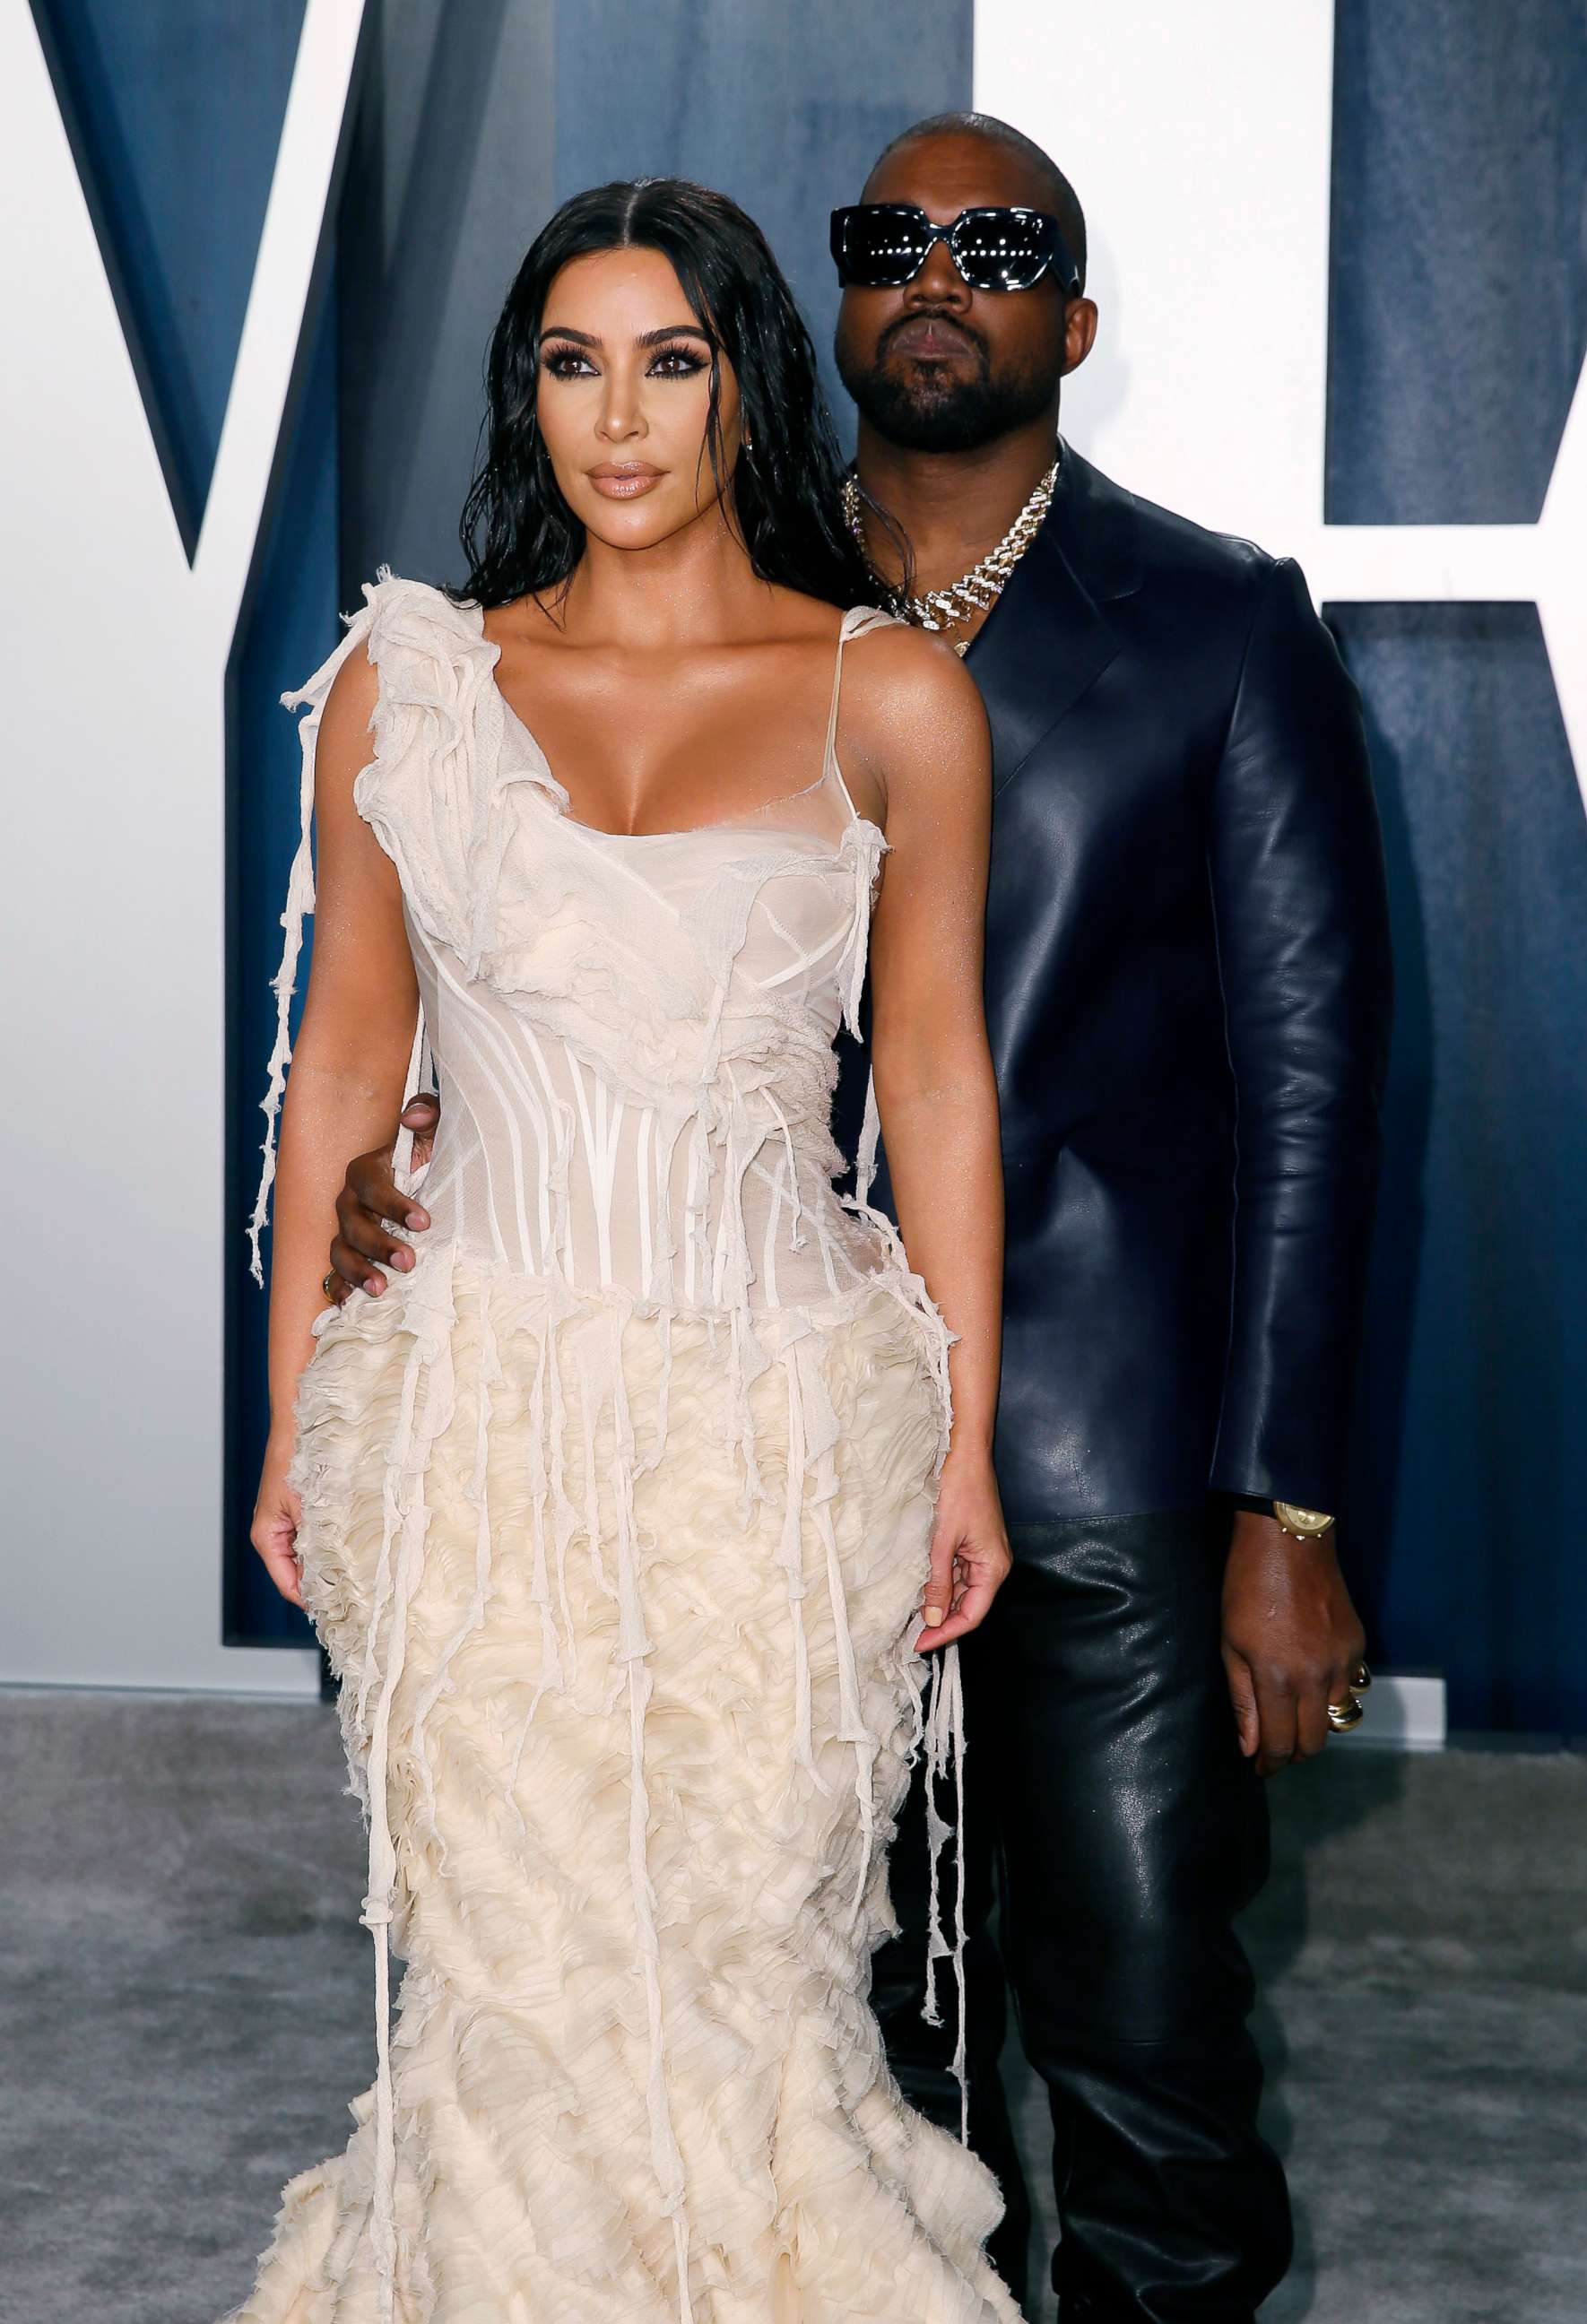 PHOTO: Kim Kardashian and Kanye West attend the Vanity Fair Oscar party in Beverly Hills during the 92nd Academy Awards, in Los Angeles, Feb. 9, 2020.